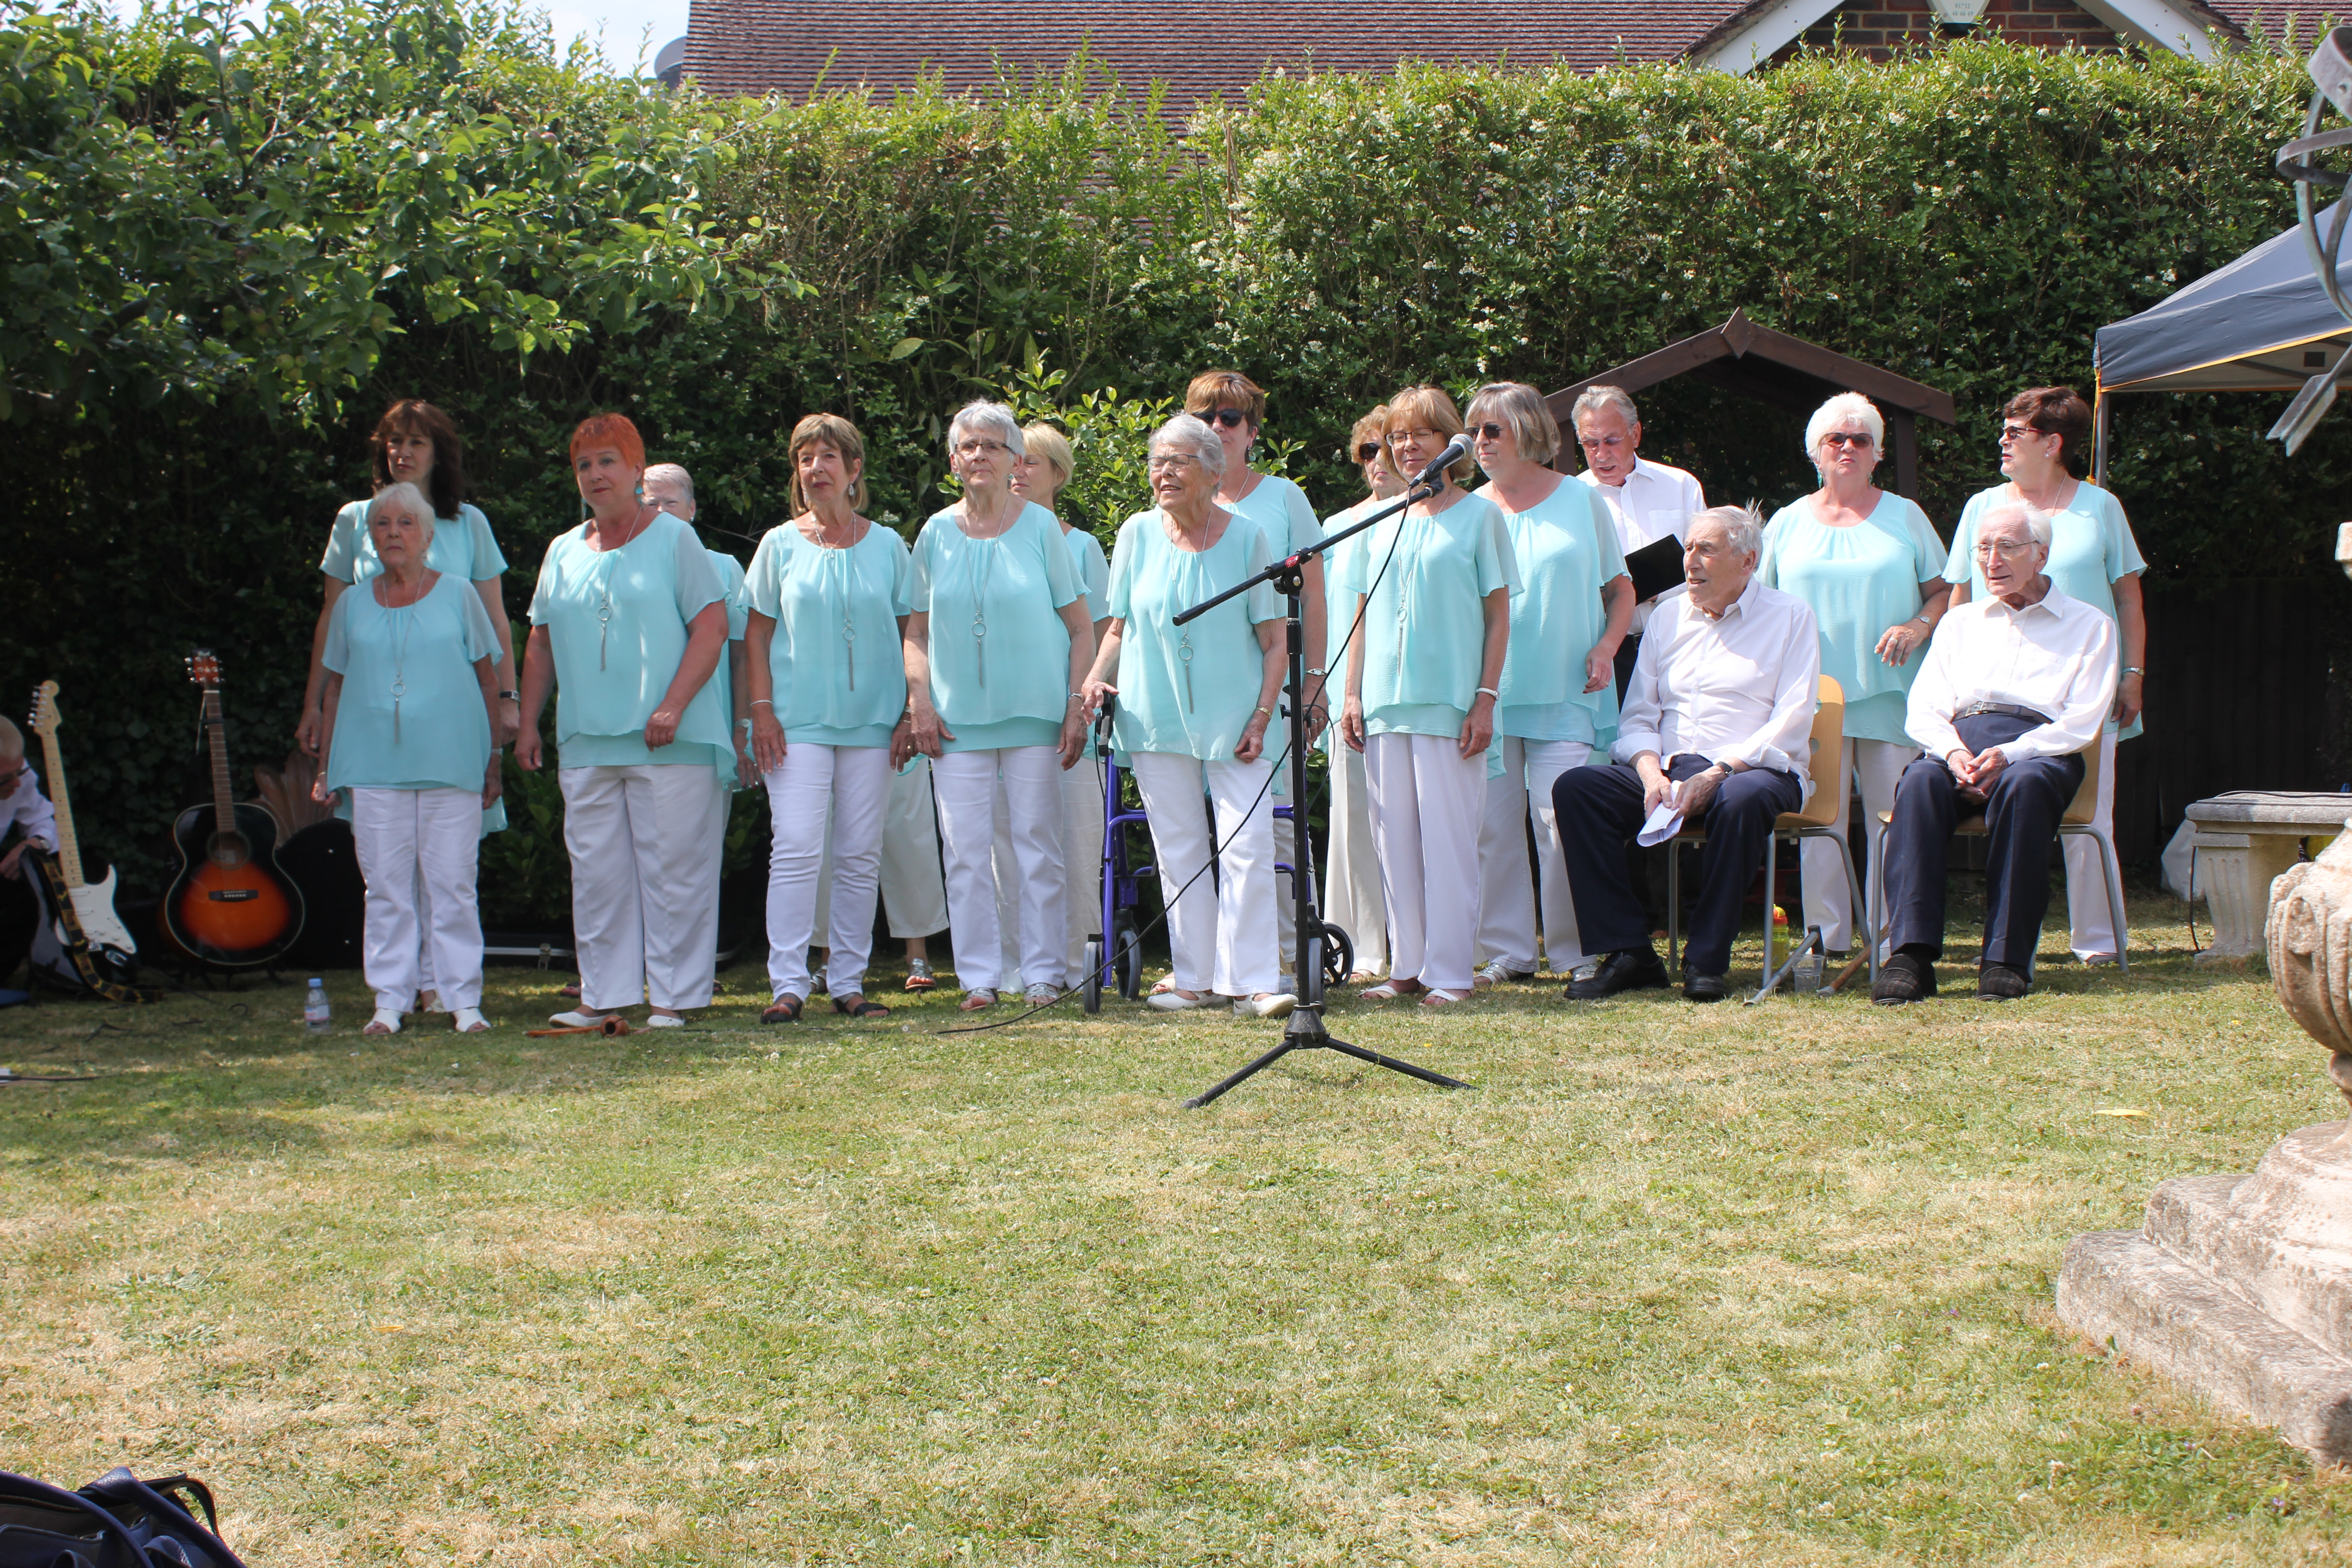 Carefree Singers performing at Music In The Garden